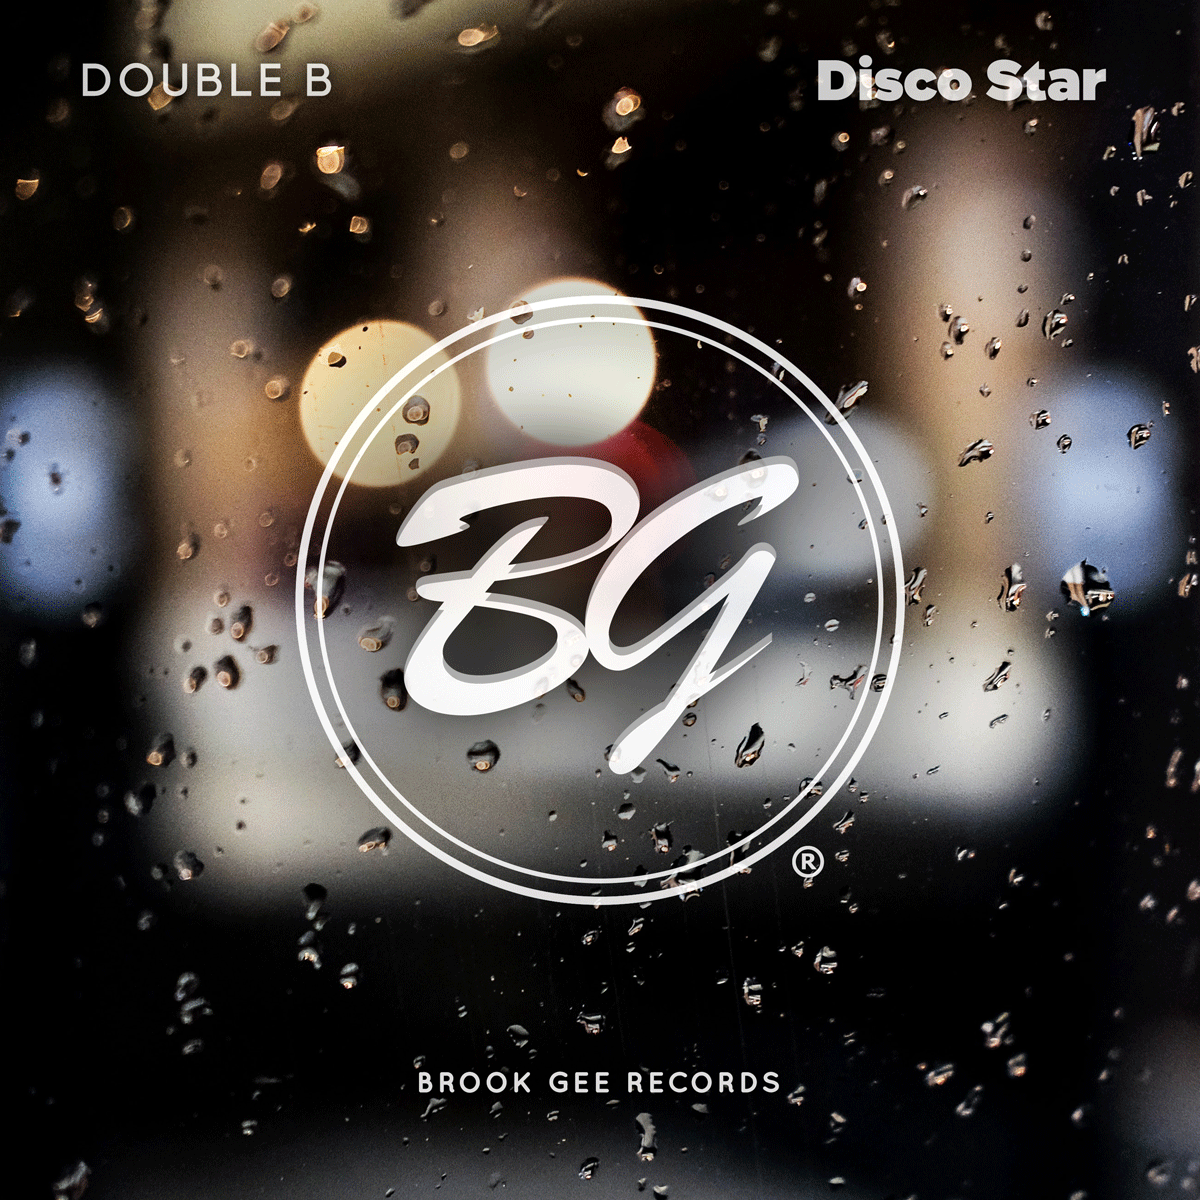 PREMIERE: Double B - Disco Star [Brook Gee Records]